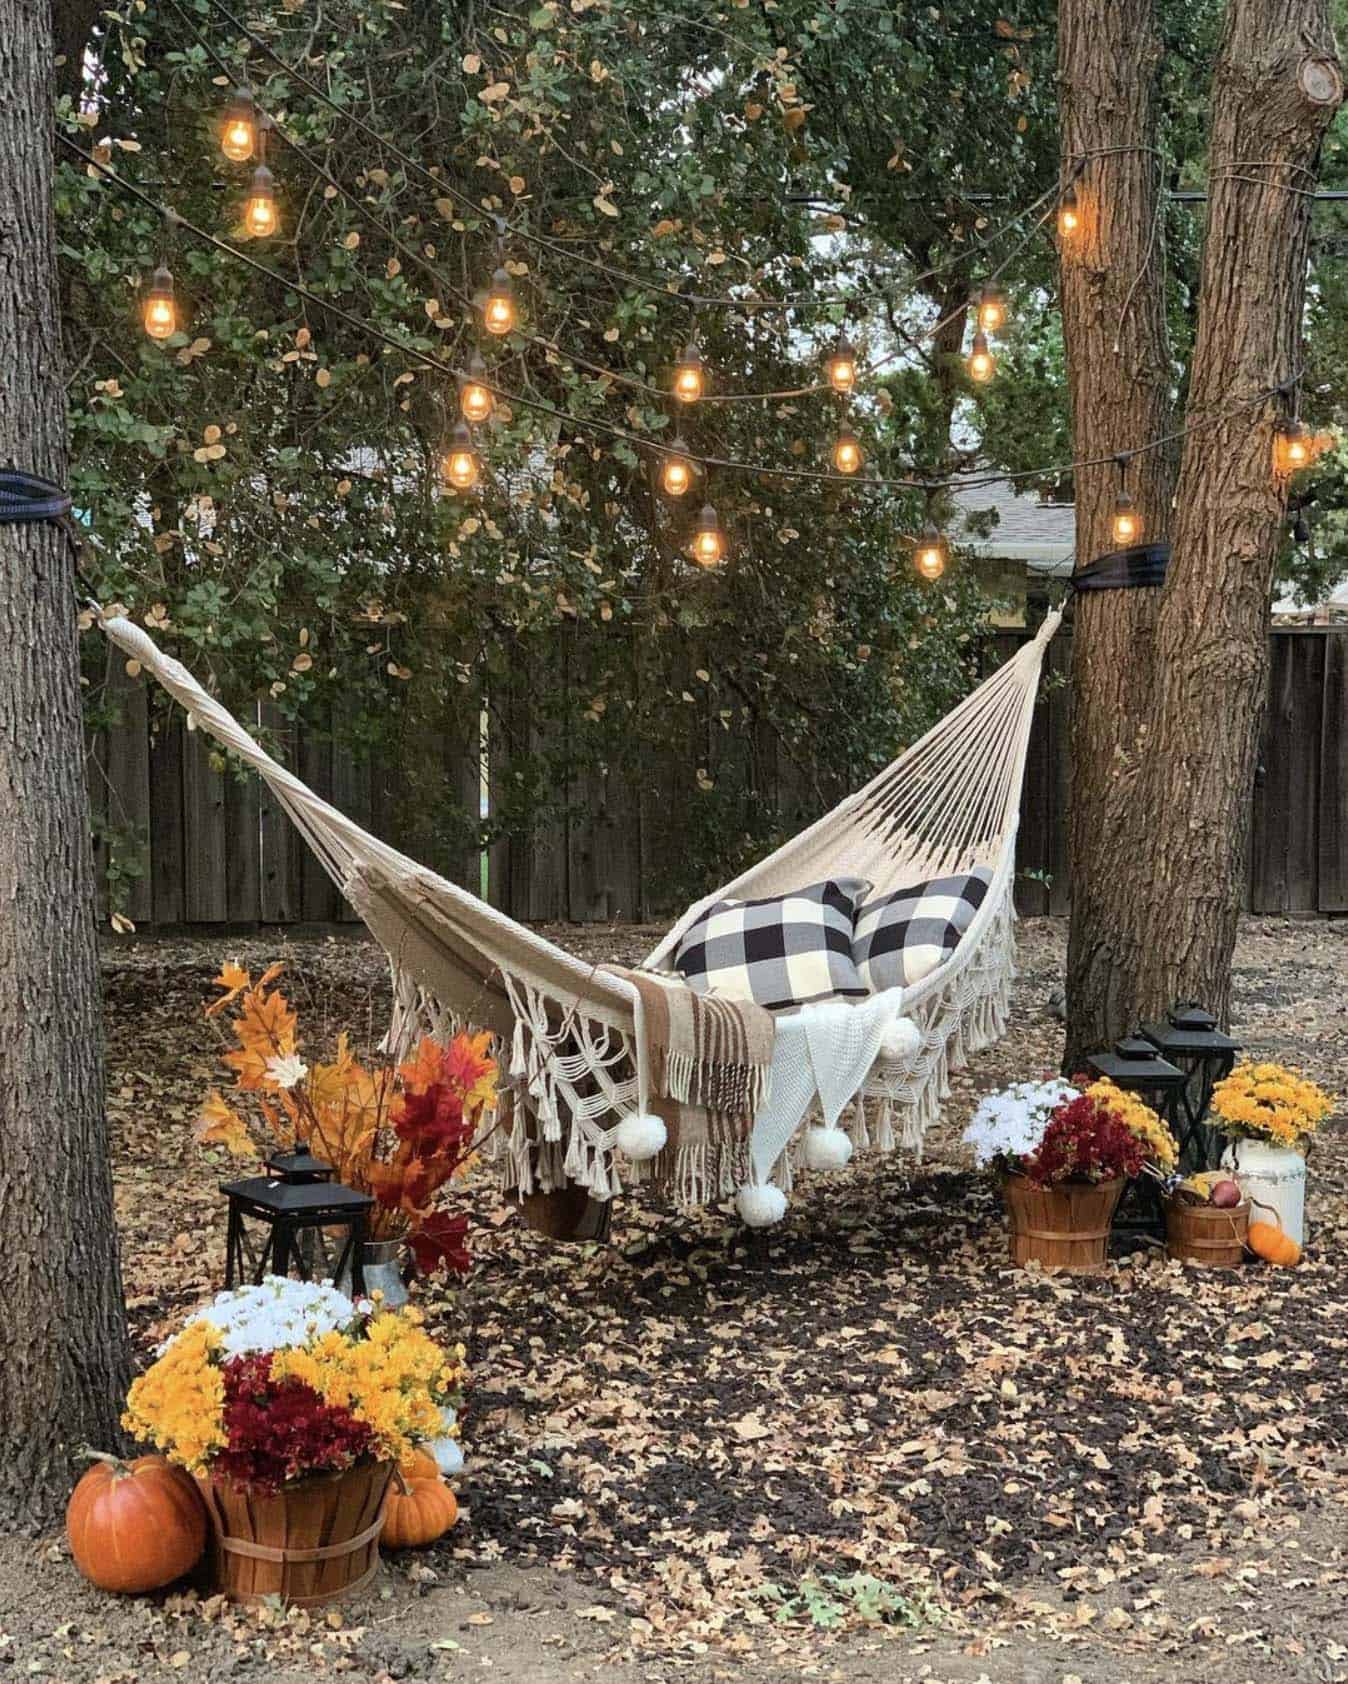 outdoor hammock decorated with fall pillows, throws, pumpkins and mums